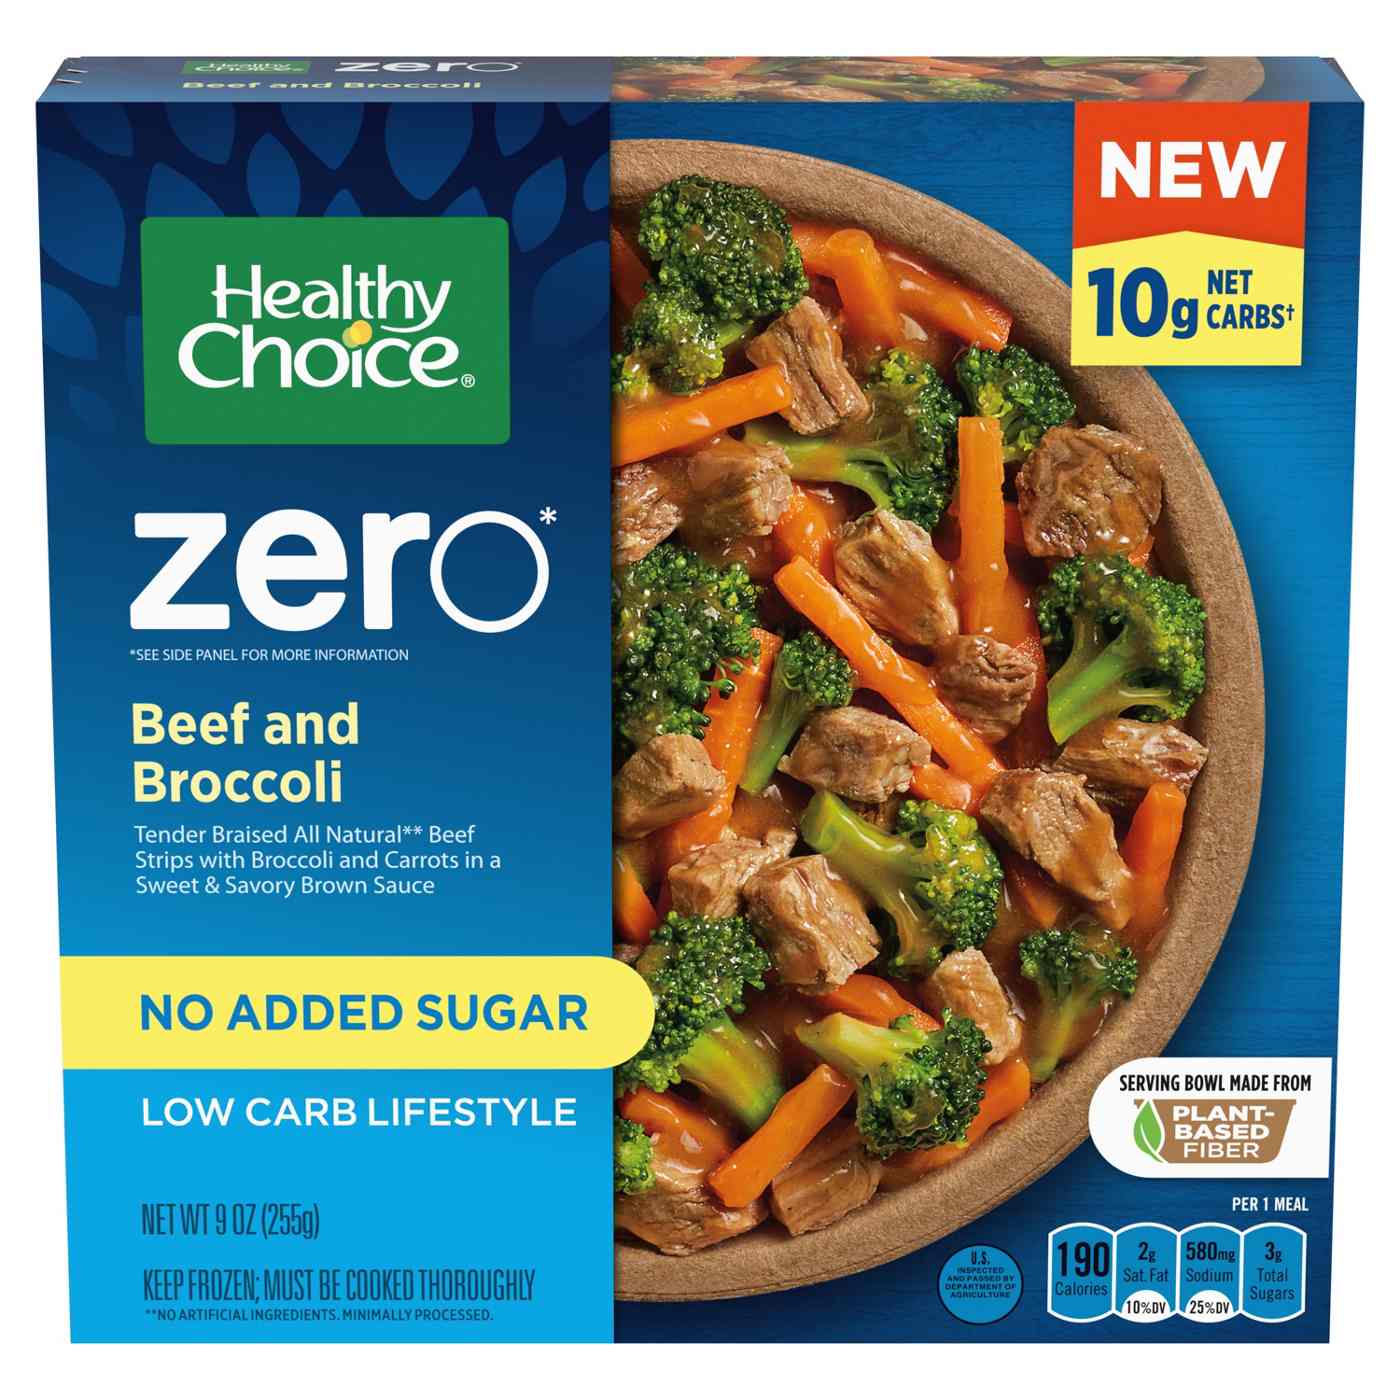 Healthy Choice Zero Low Carb Lifestyle Beef & Broccoli Frozen Meal; image 1 of 5